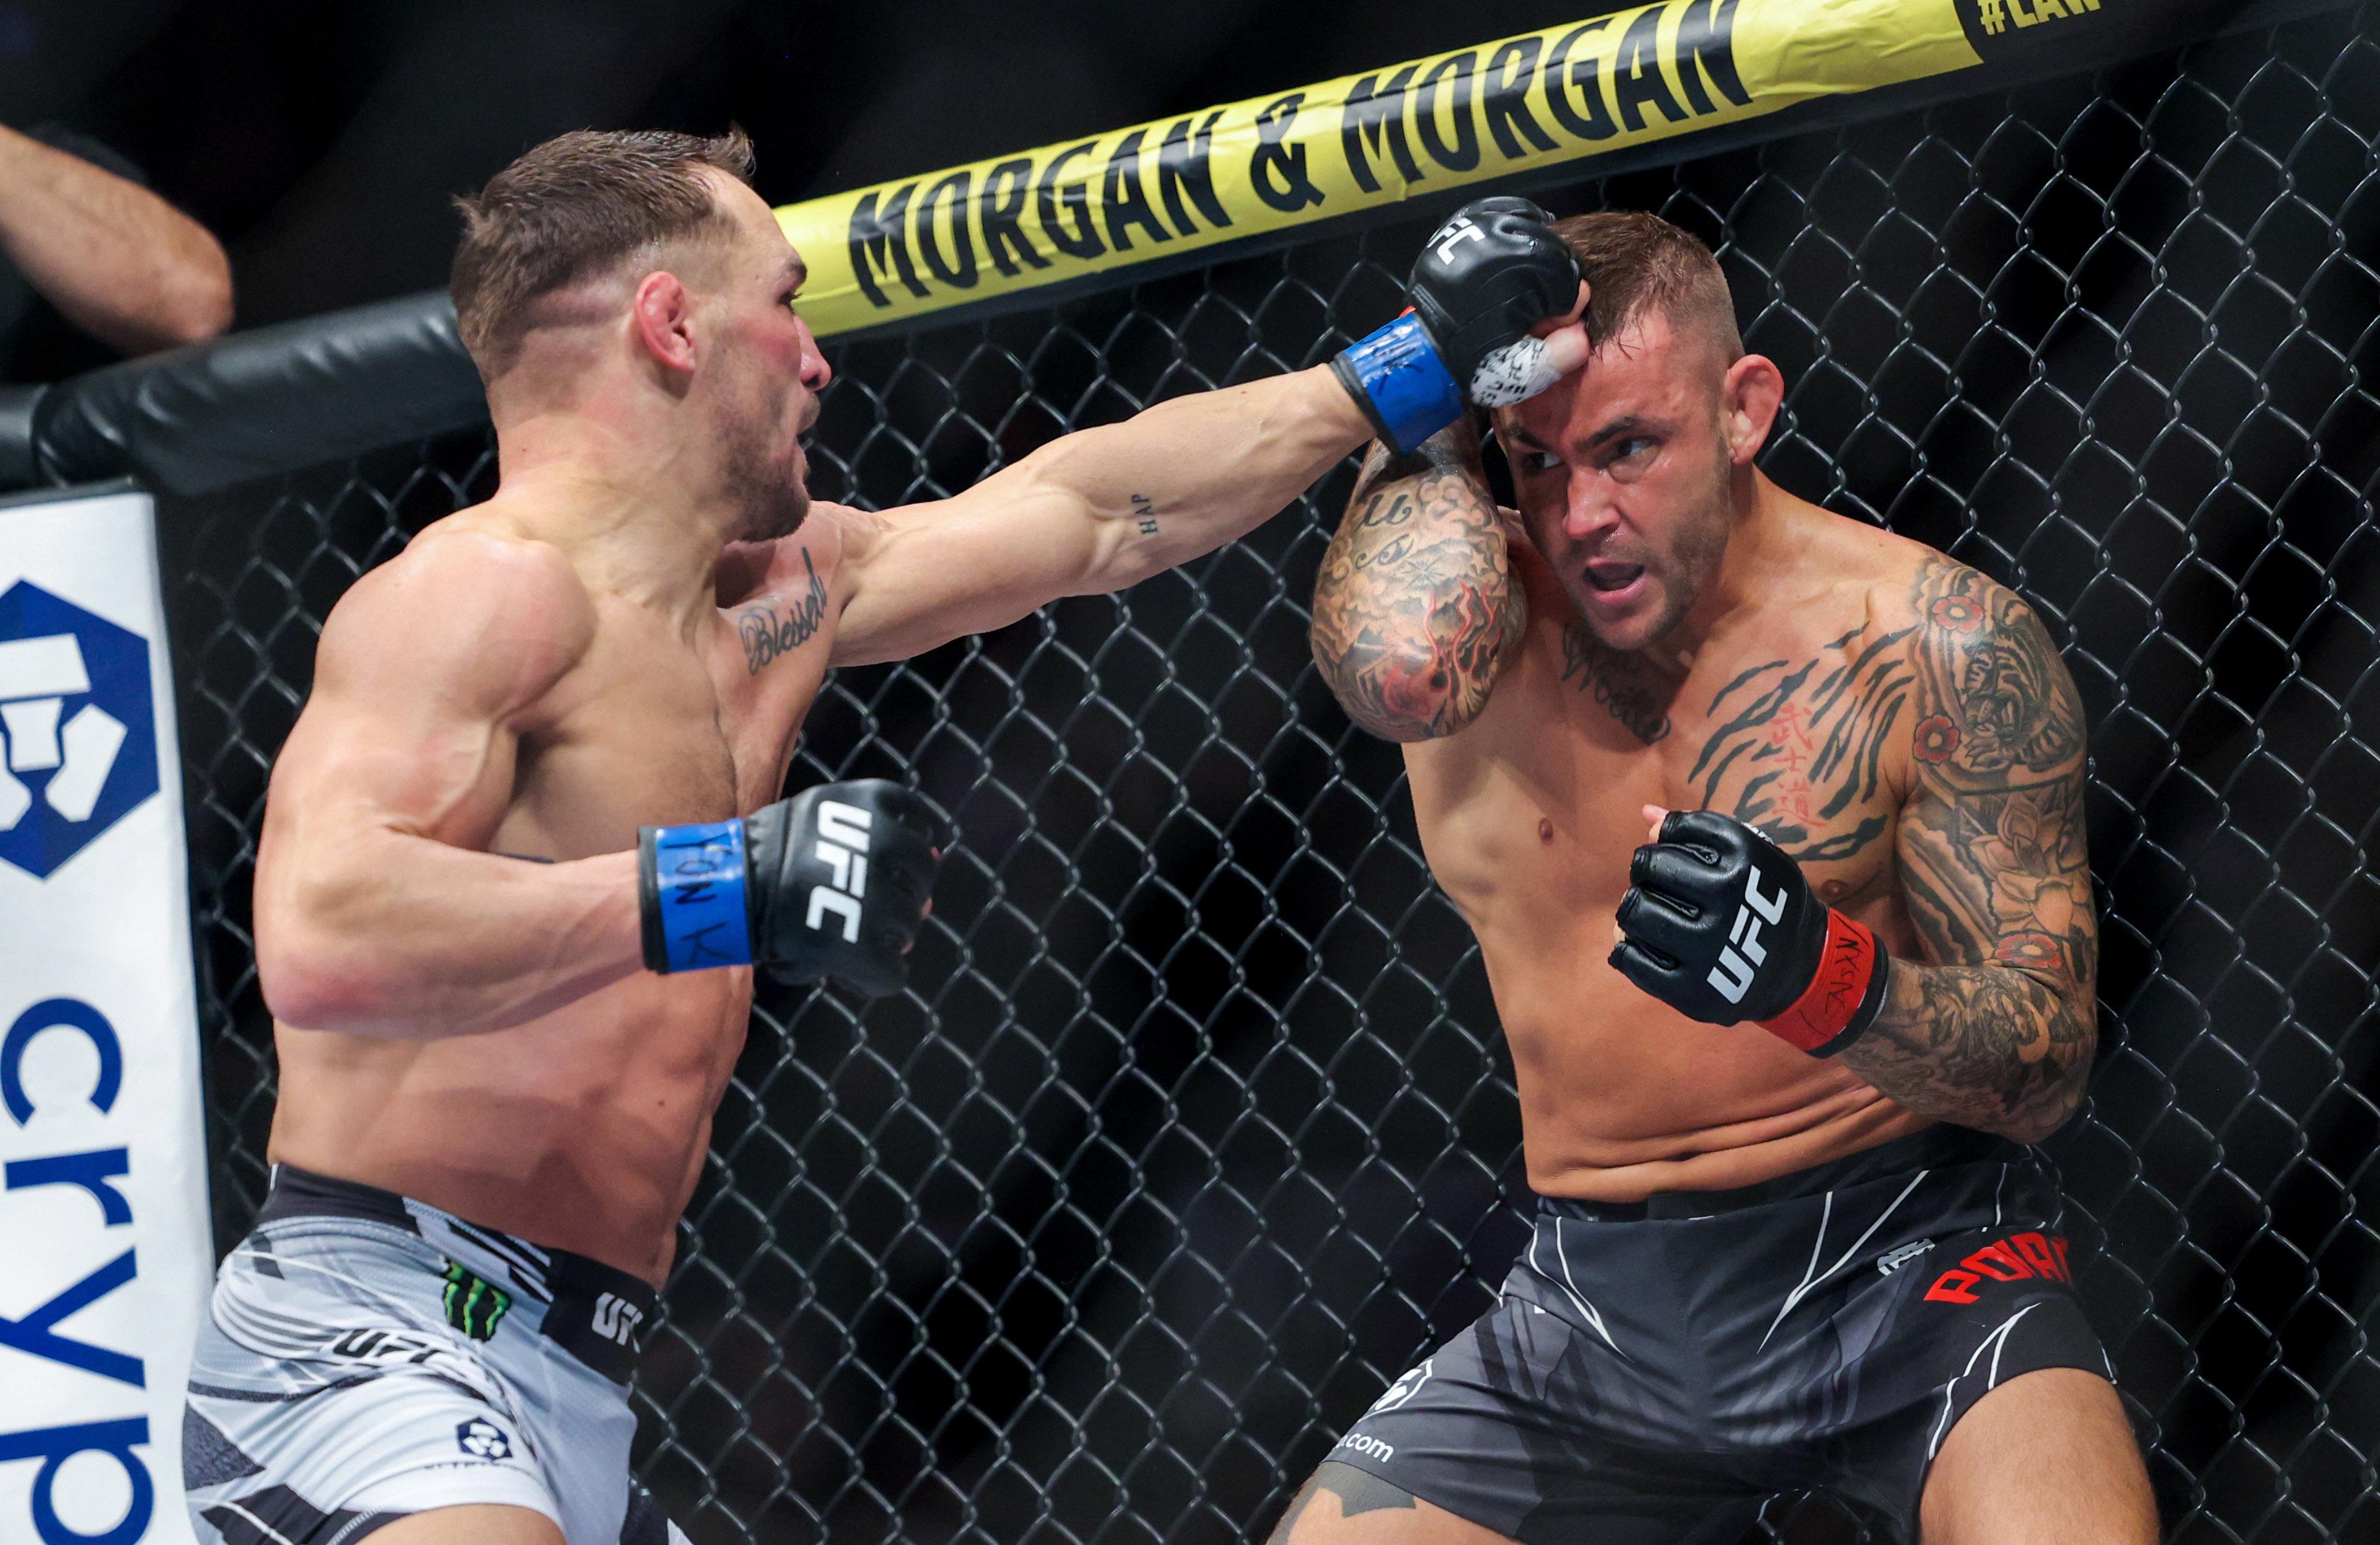 Dustin Poirier submits Michael Chandler in epic encounter at UFC 281 GMA News Online